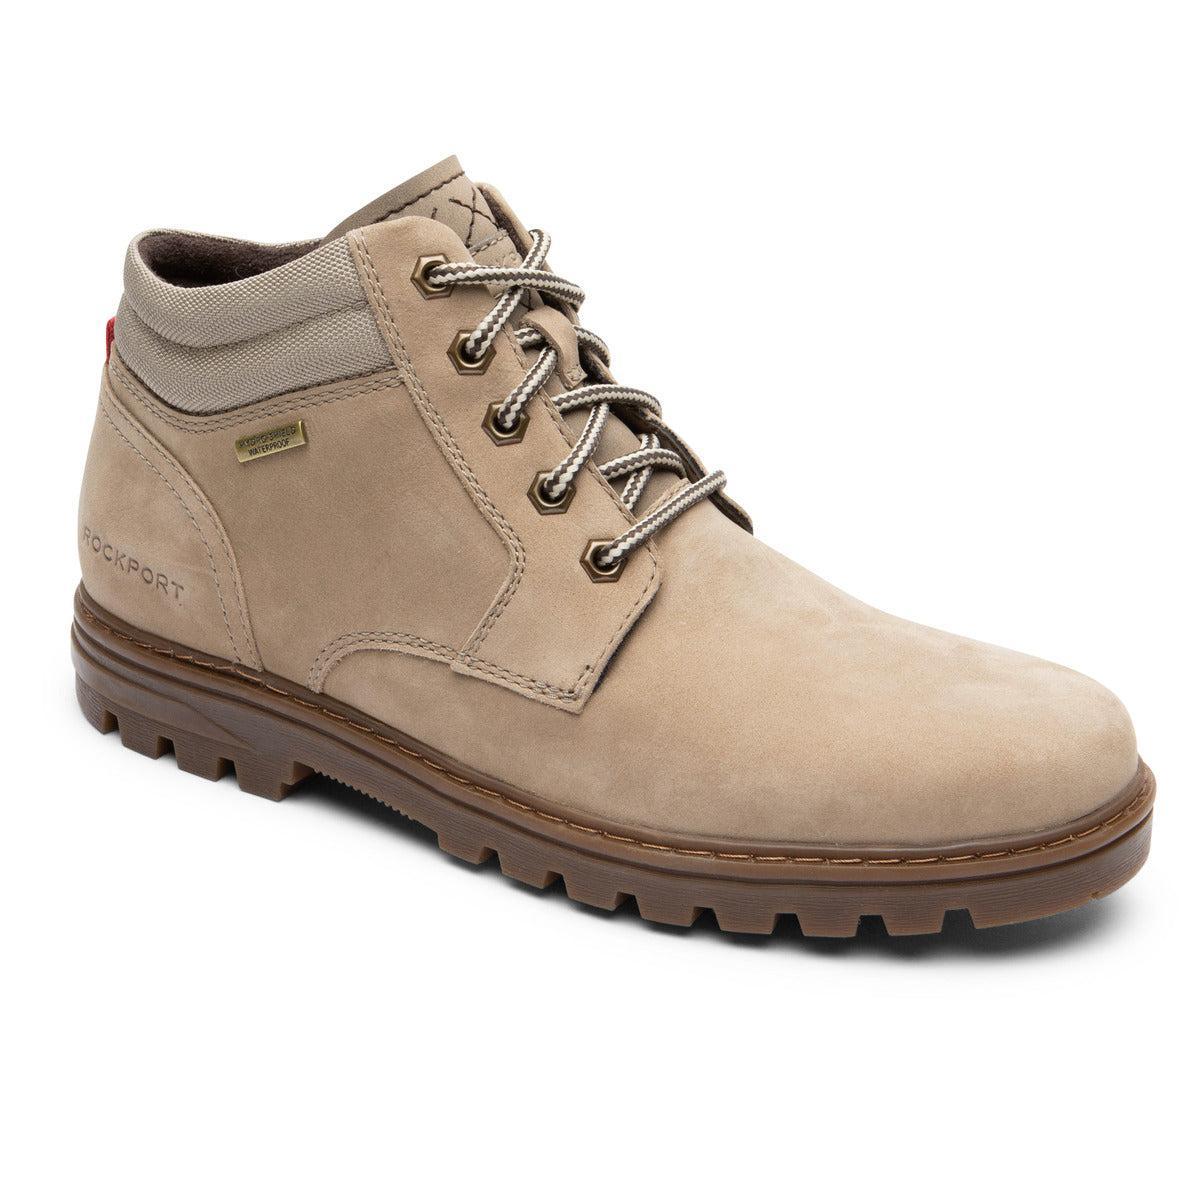 Men's Weather or Not Waterproof Boot Product Image